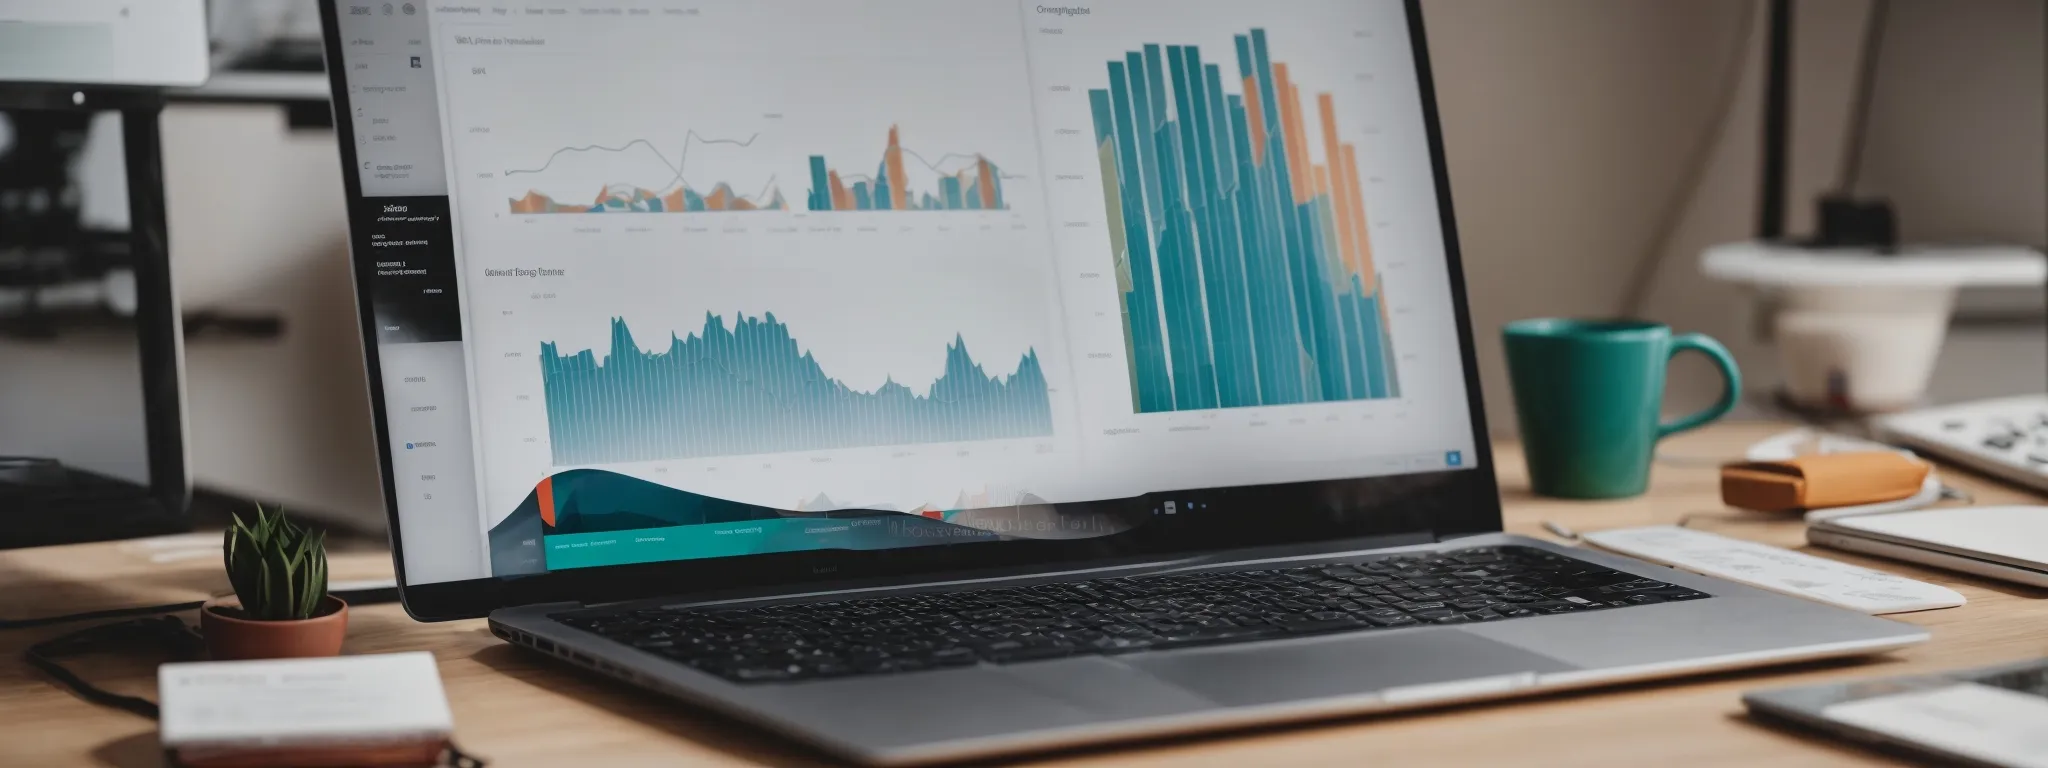 a laptop displaying colorful graphs and charts sits on a minimalist desk, highlighting the analytical process of e-commerce seo optimization.